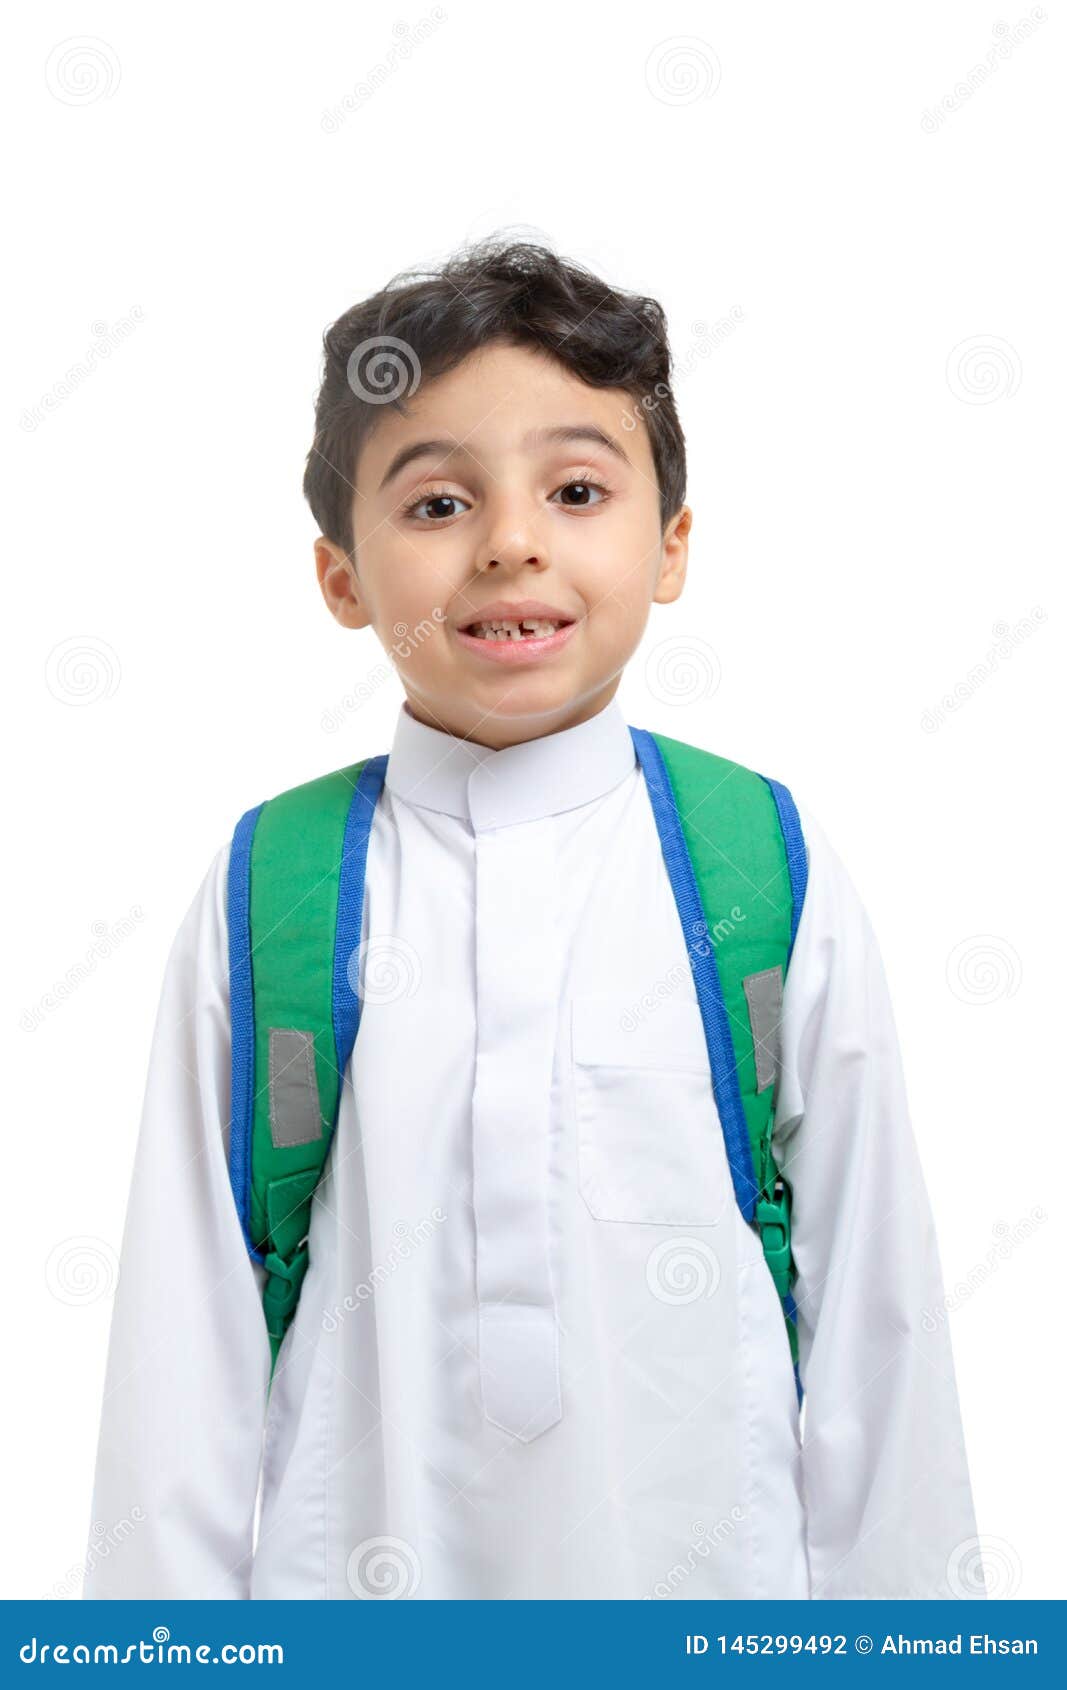 arab school boy closeup on face with a smile and broken tooth, wearing white traditional saudi thobe, back pack and sneakers,